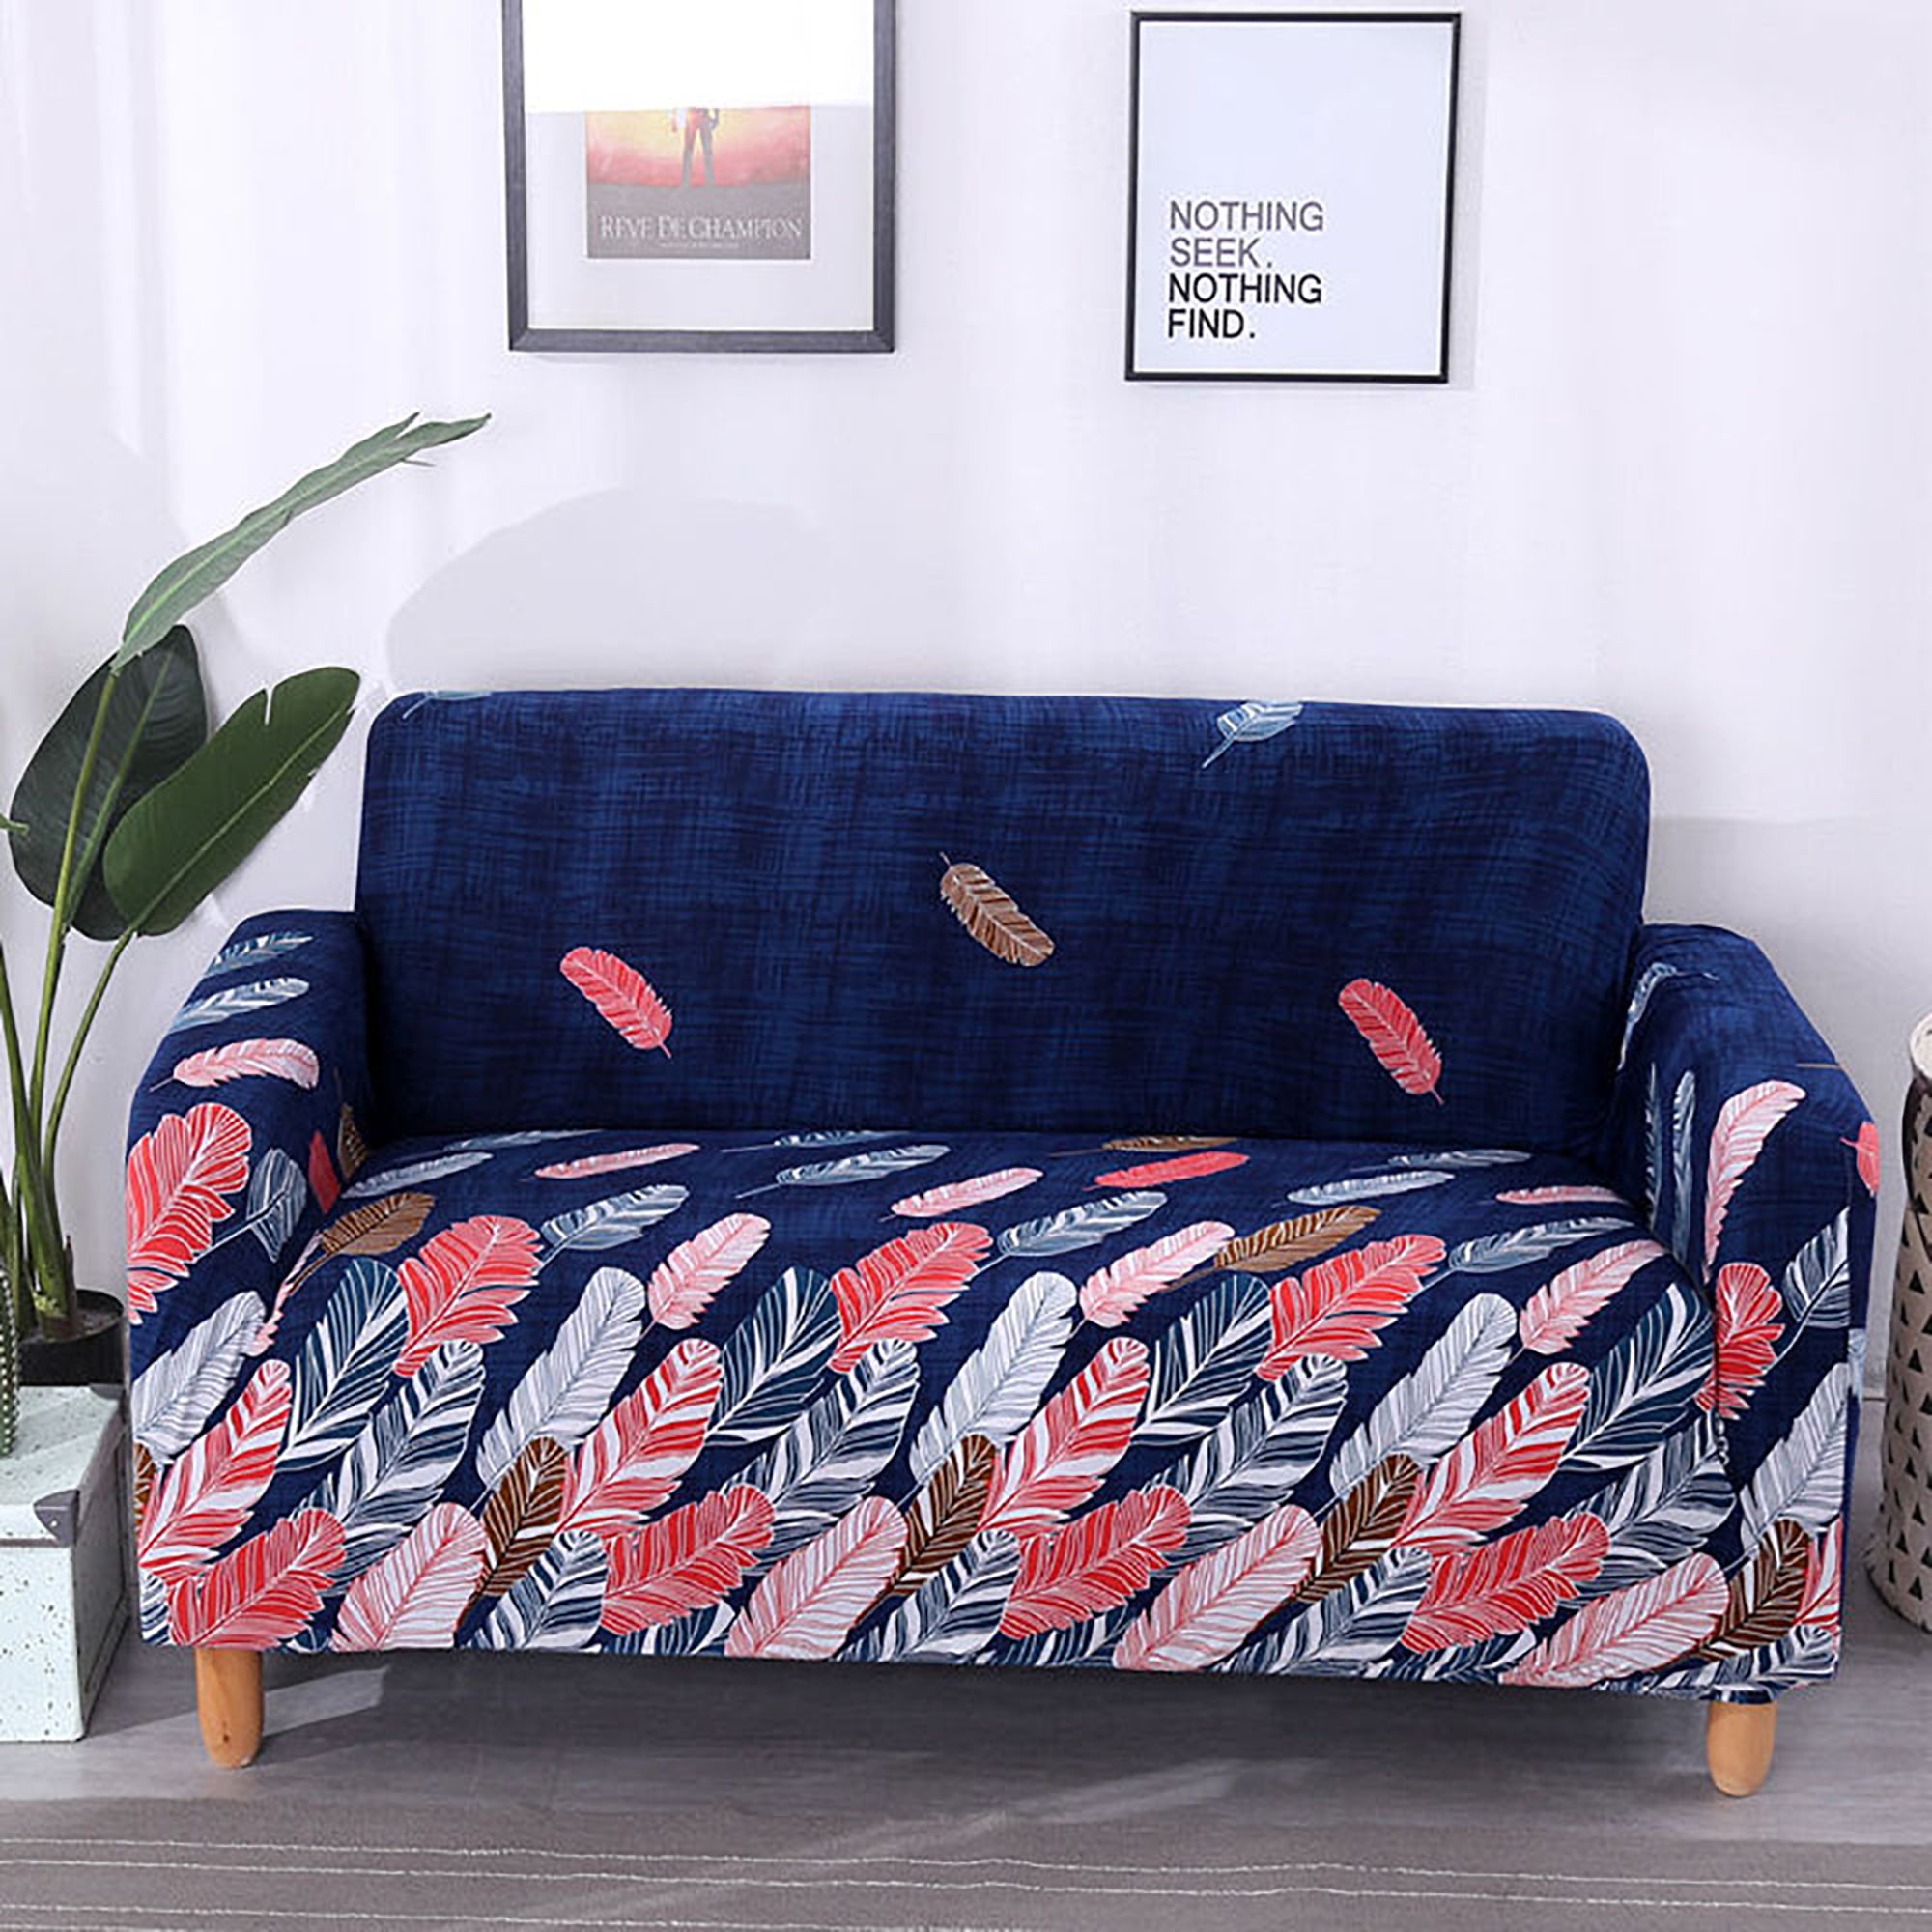 Details about   1/2/3/4 Sofa Covers Couch Slipcover Stretch Elastic Fabric Settee Protector Fit 